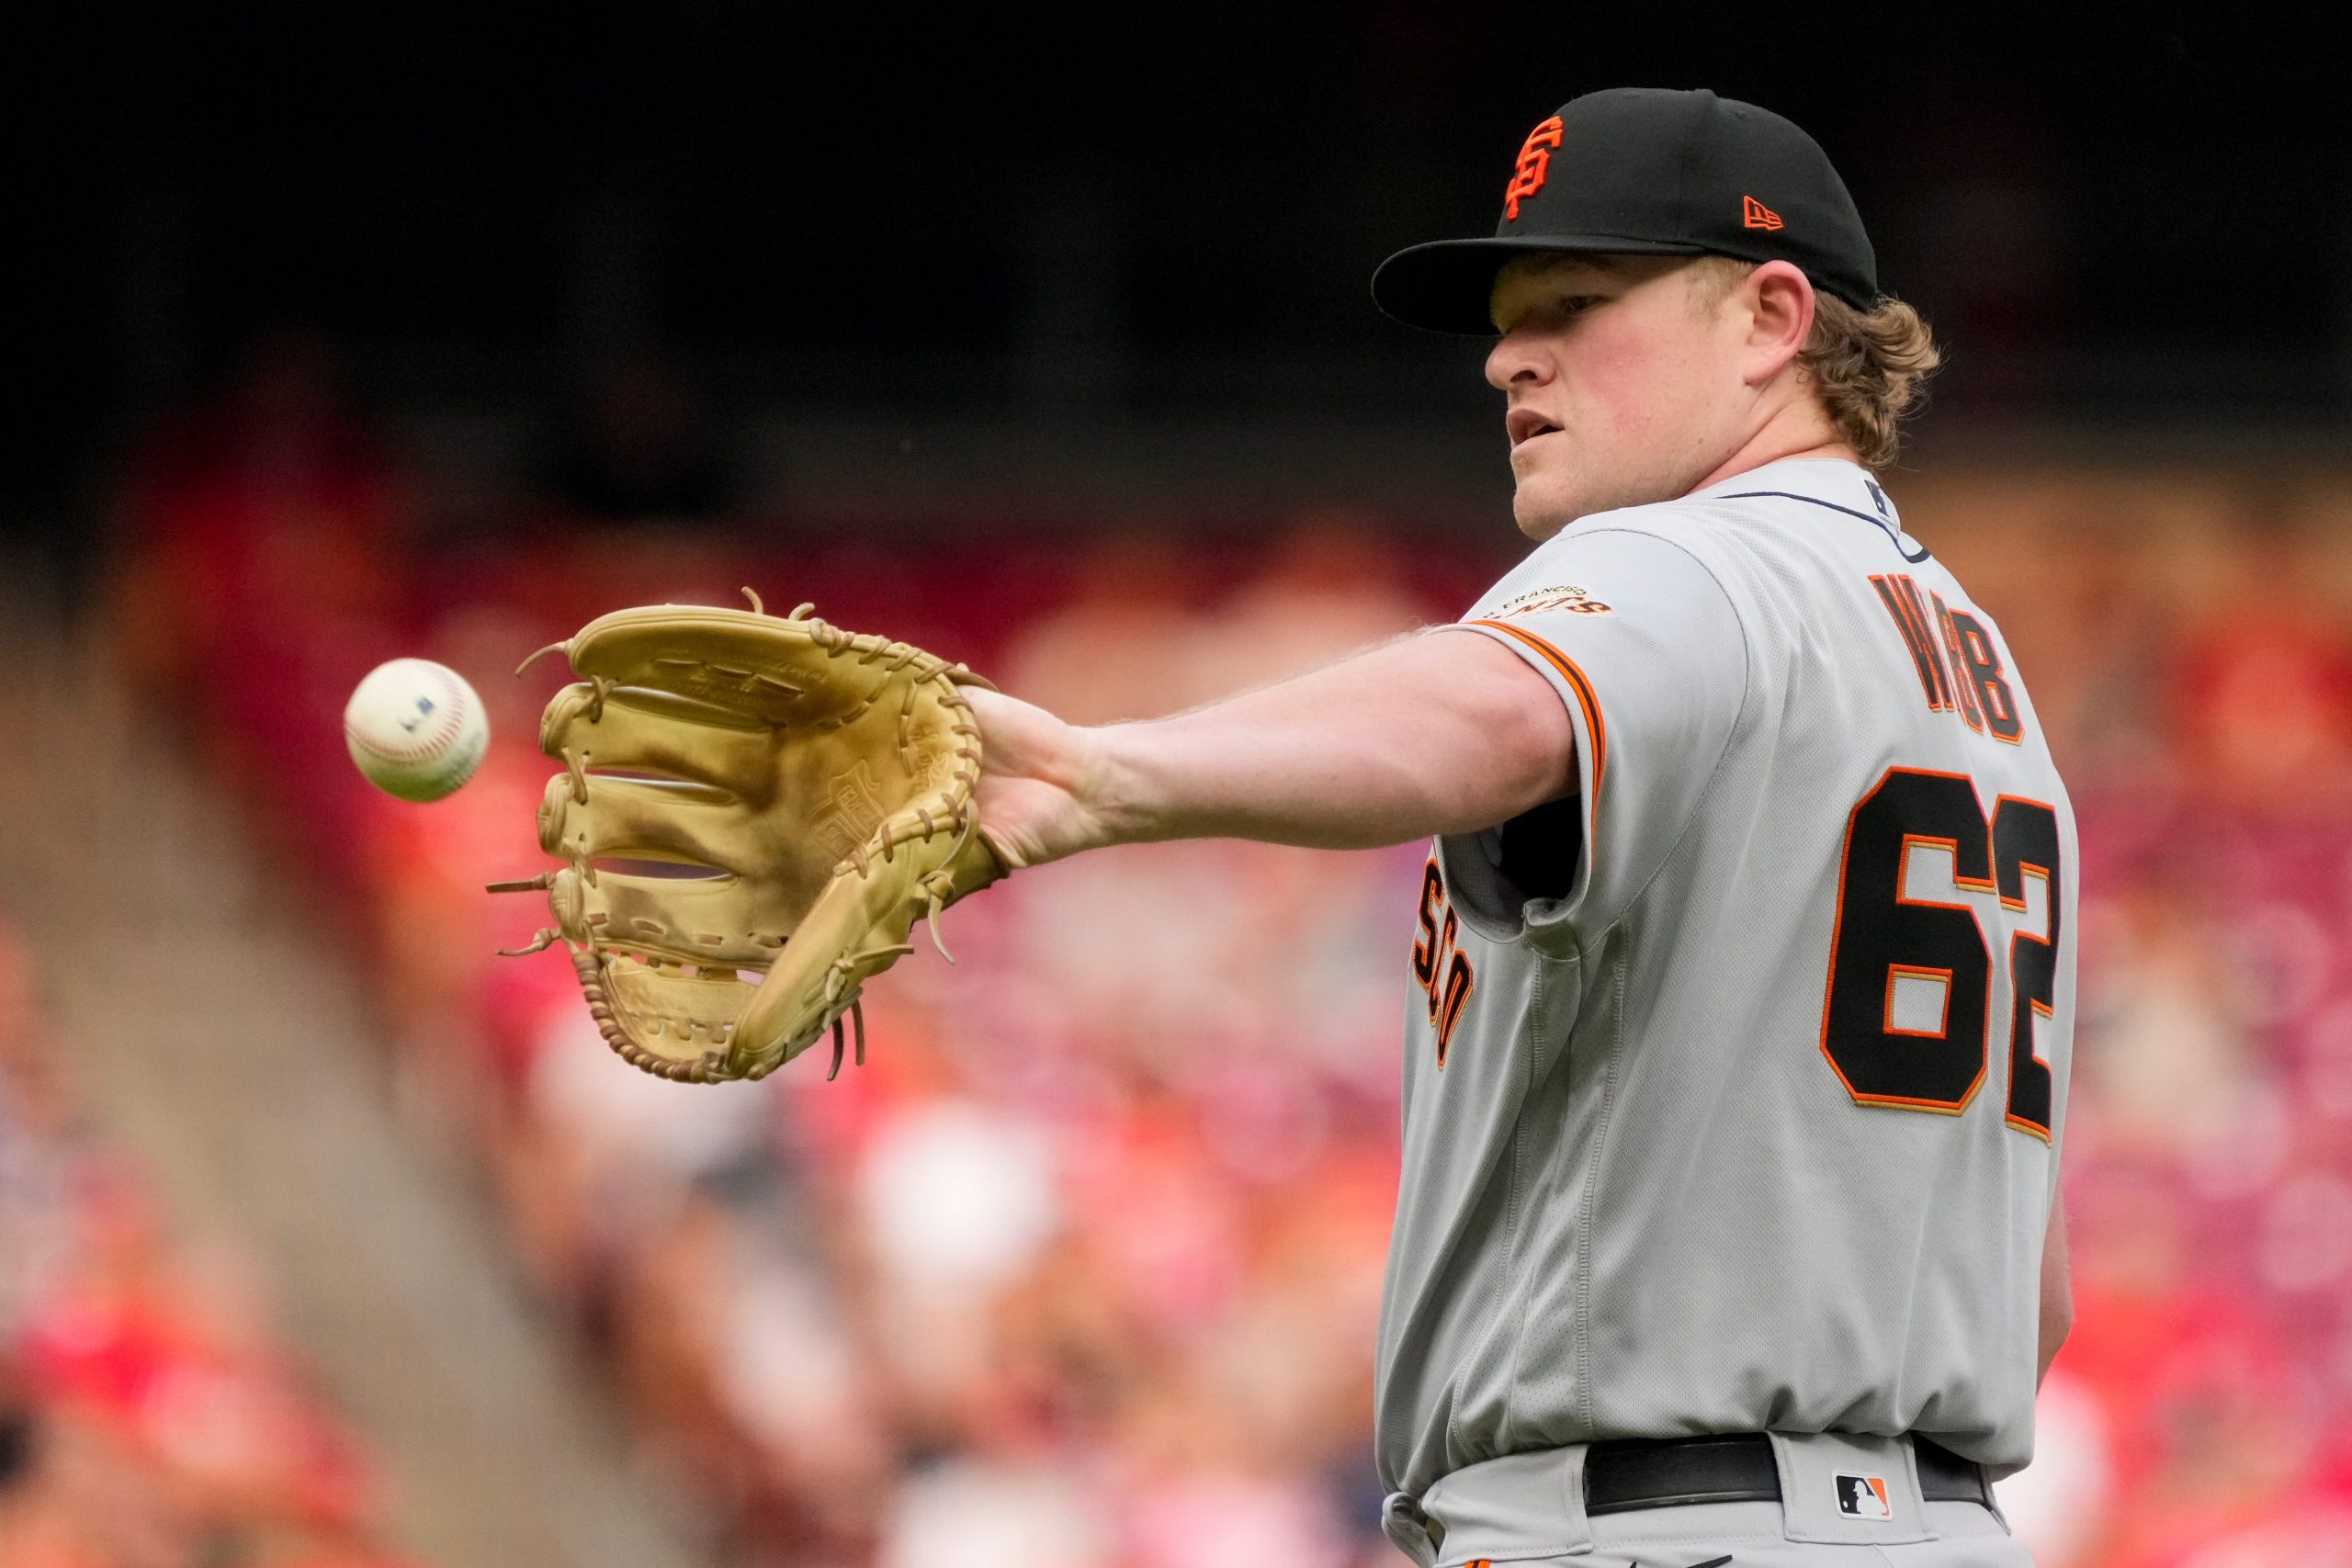 SF Giants play to their competition, but NL-worst Reds don't get the message